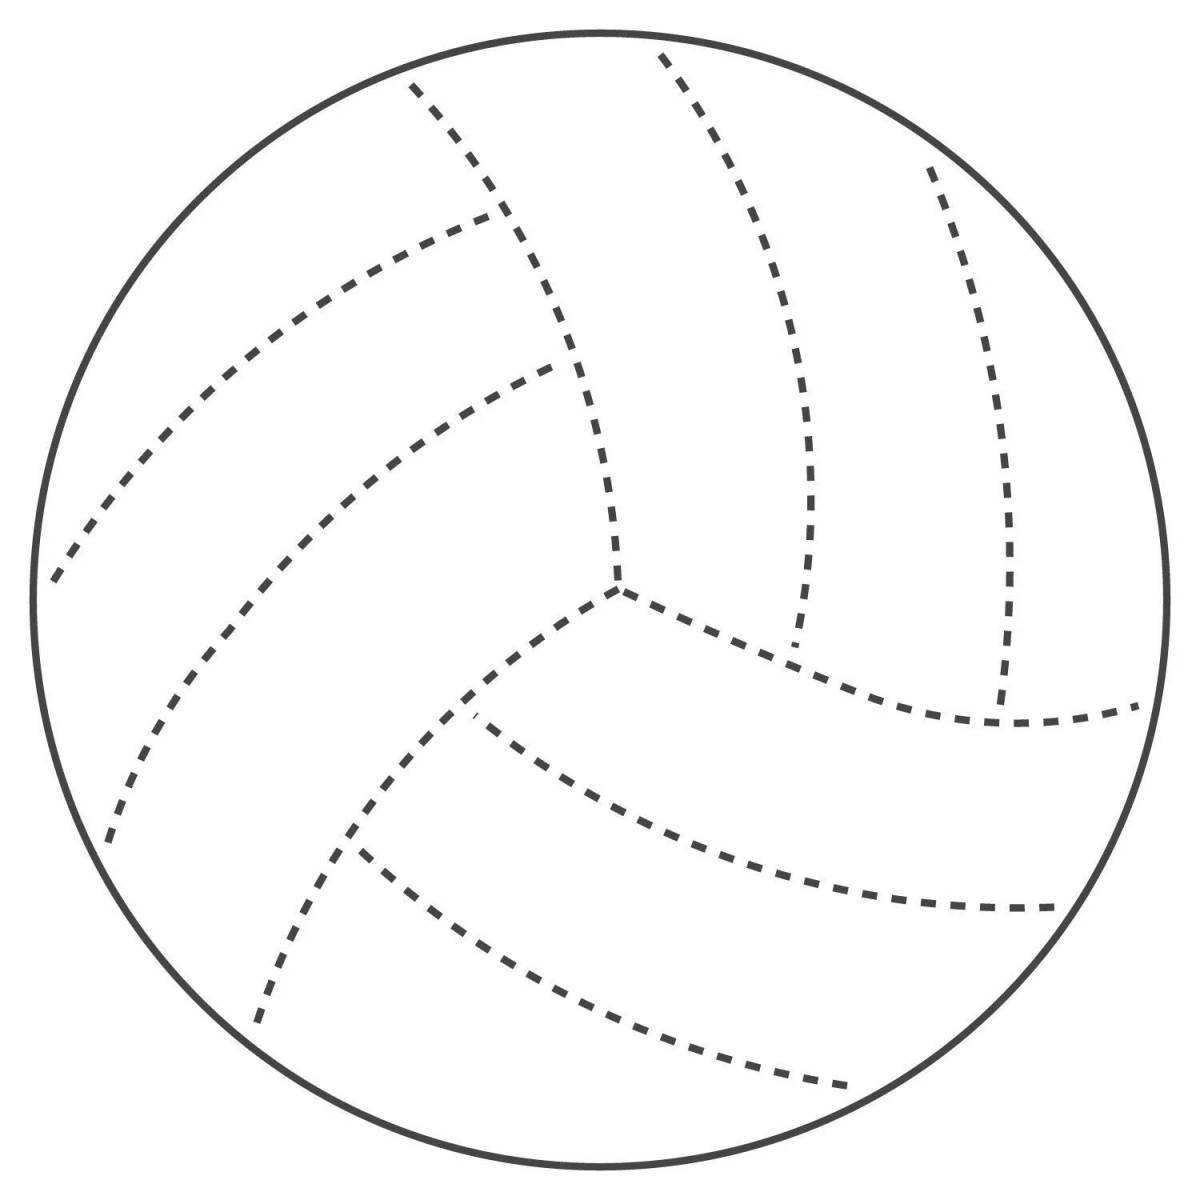 Amazing round lines create a coloring page